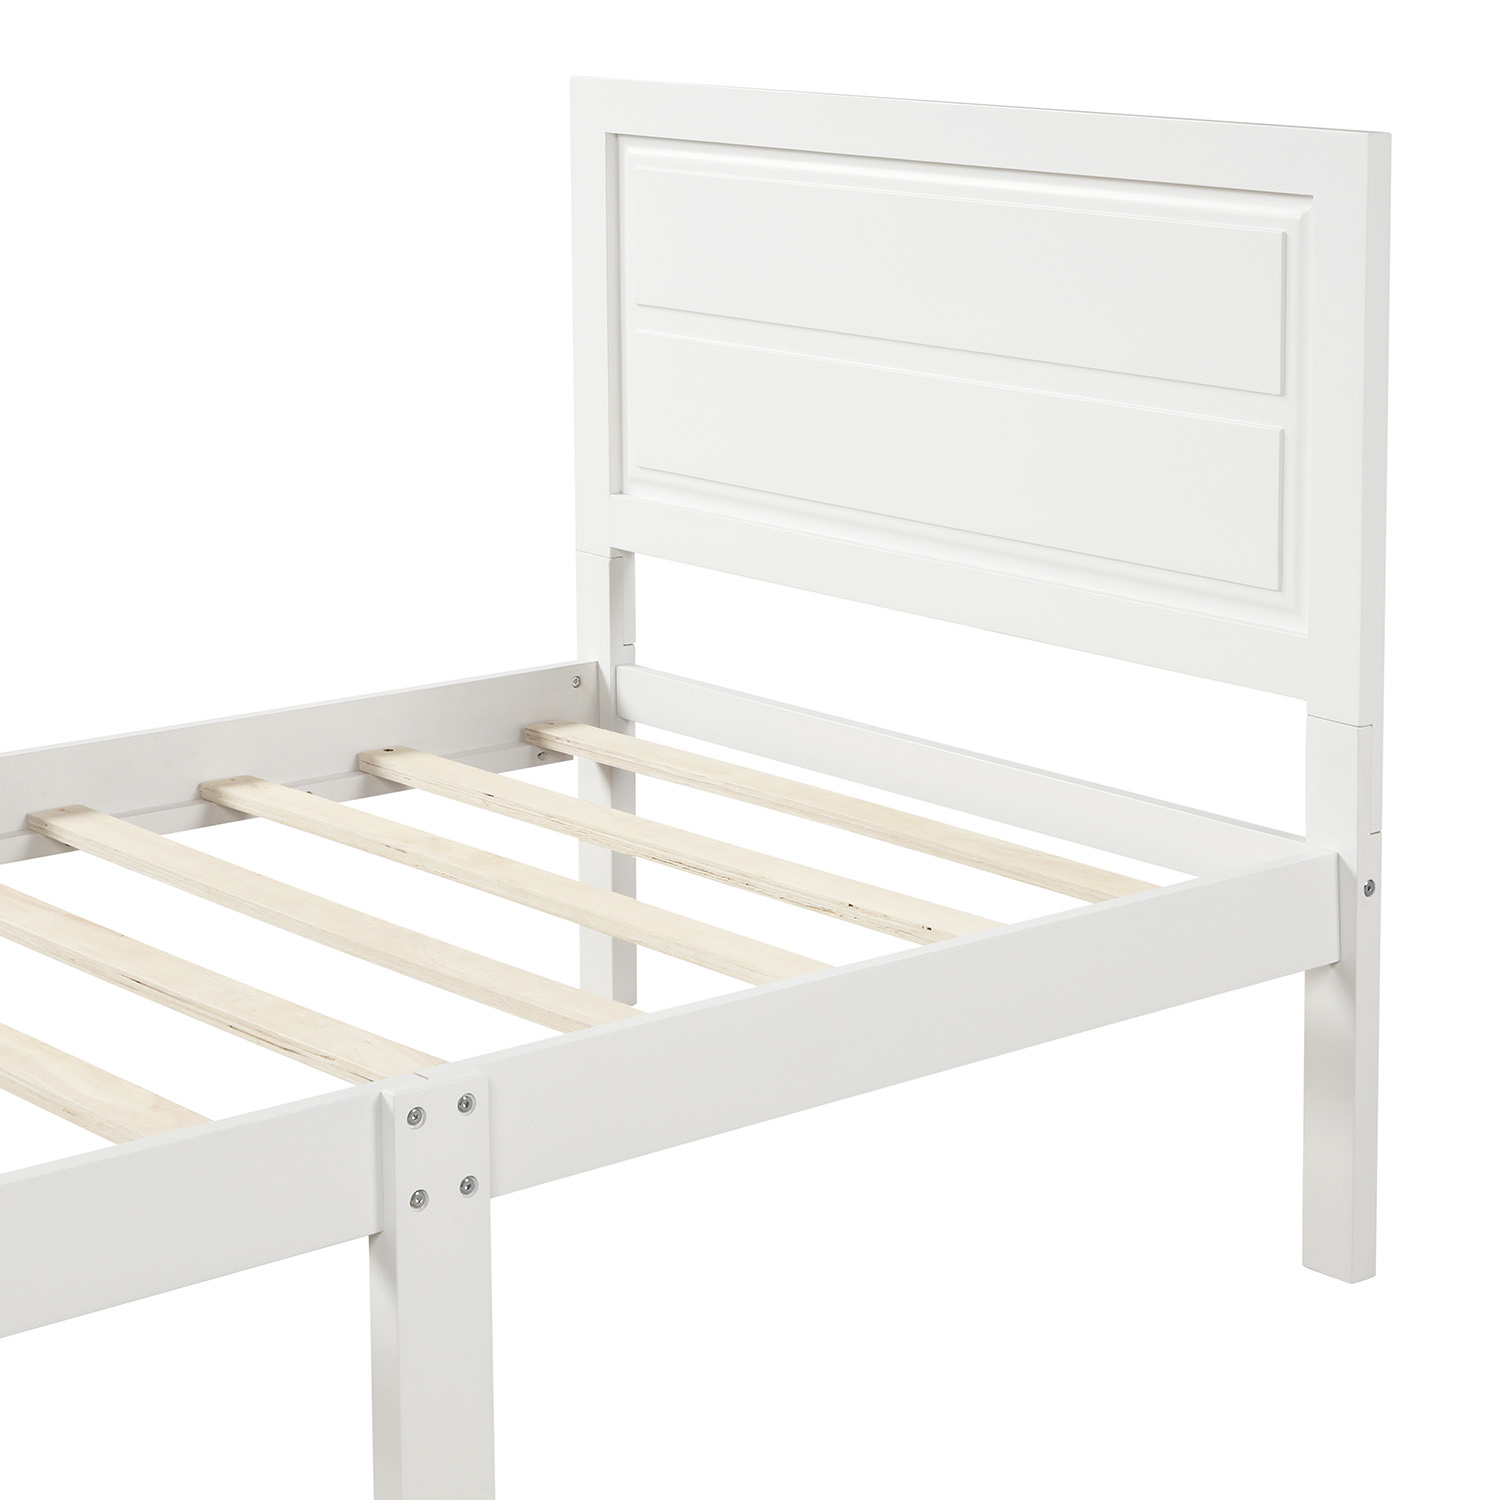 Twin Bed Frame with Headboard, Wood Single Bed Frame Wood Platform Bed, Twin Single Bed Frame w/ Wood Slat, Twin Platform Bed Frame for Kids, Platform Twin Bed Frame No Box Spring Needed, White, R108 - image 4 of 6